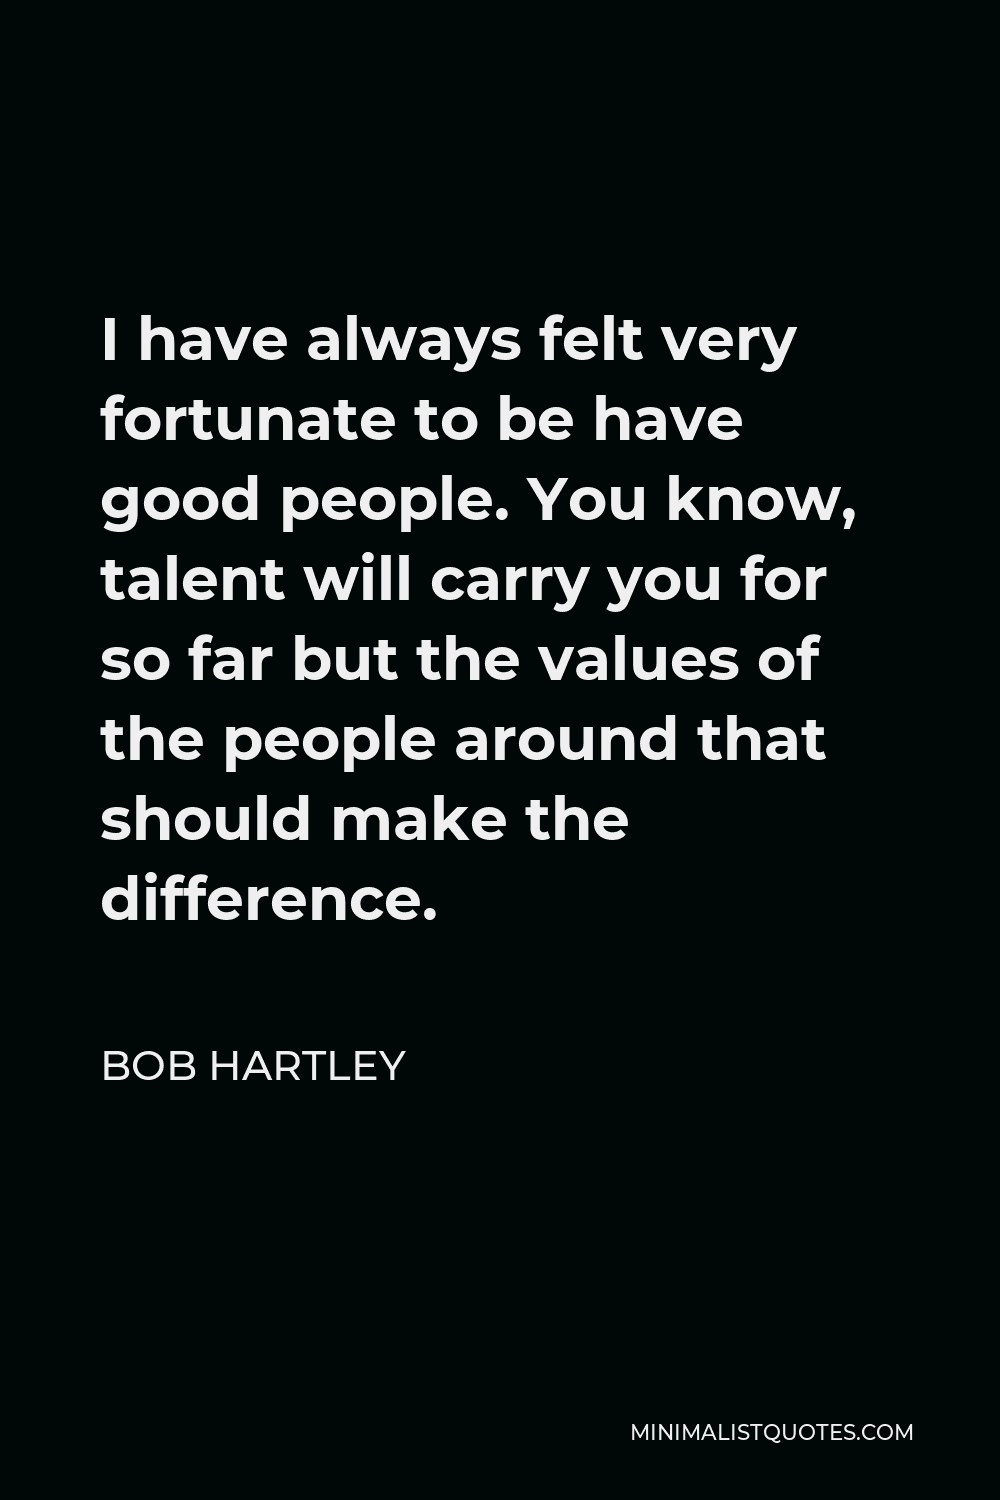 Bob Hartley Quote - I have always felt very fortunate to be have good people. You know, talent will carry you for so far but the values of the people around that should make the difference.